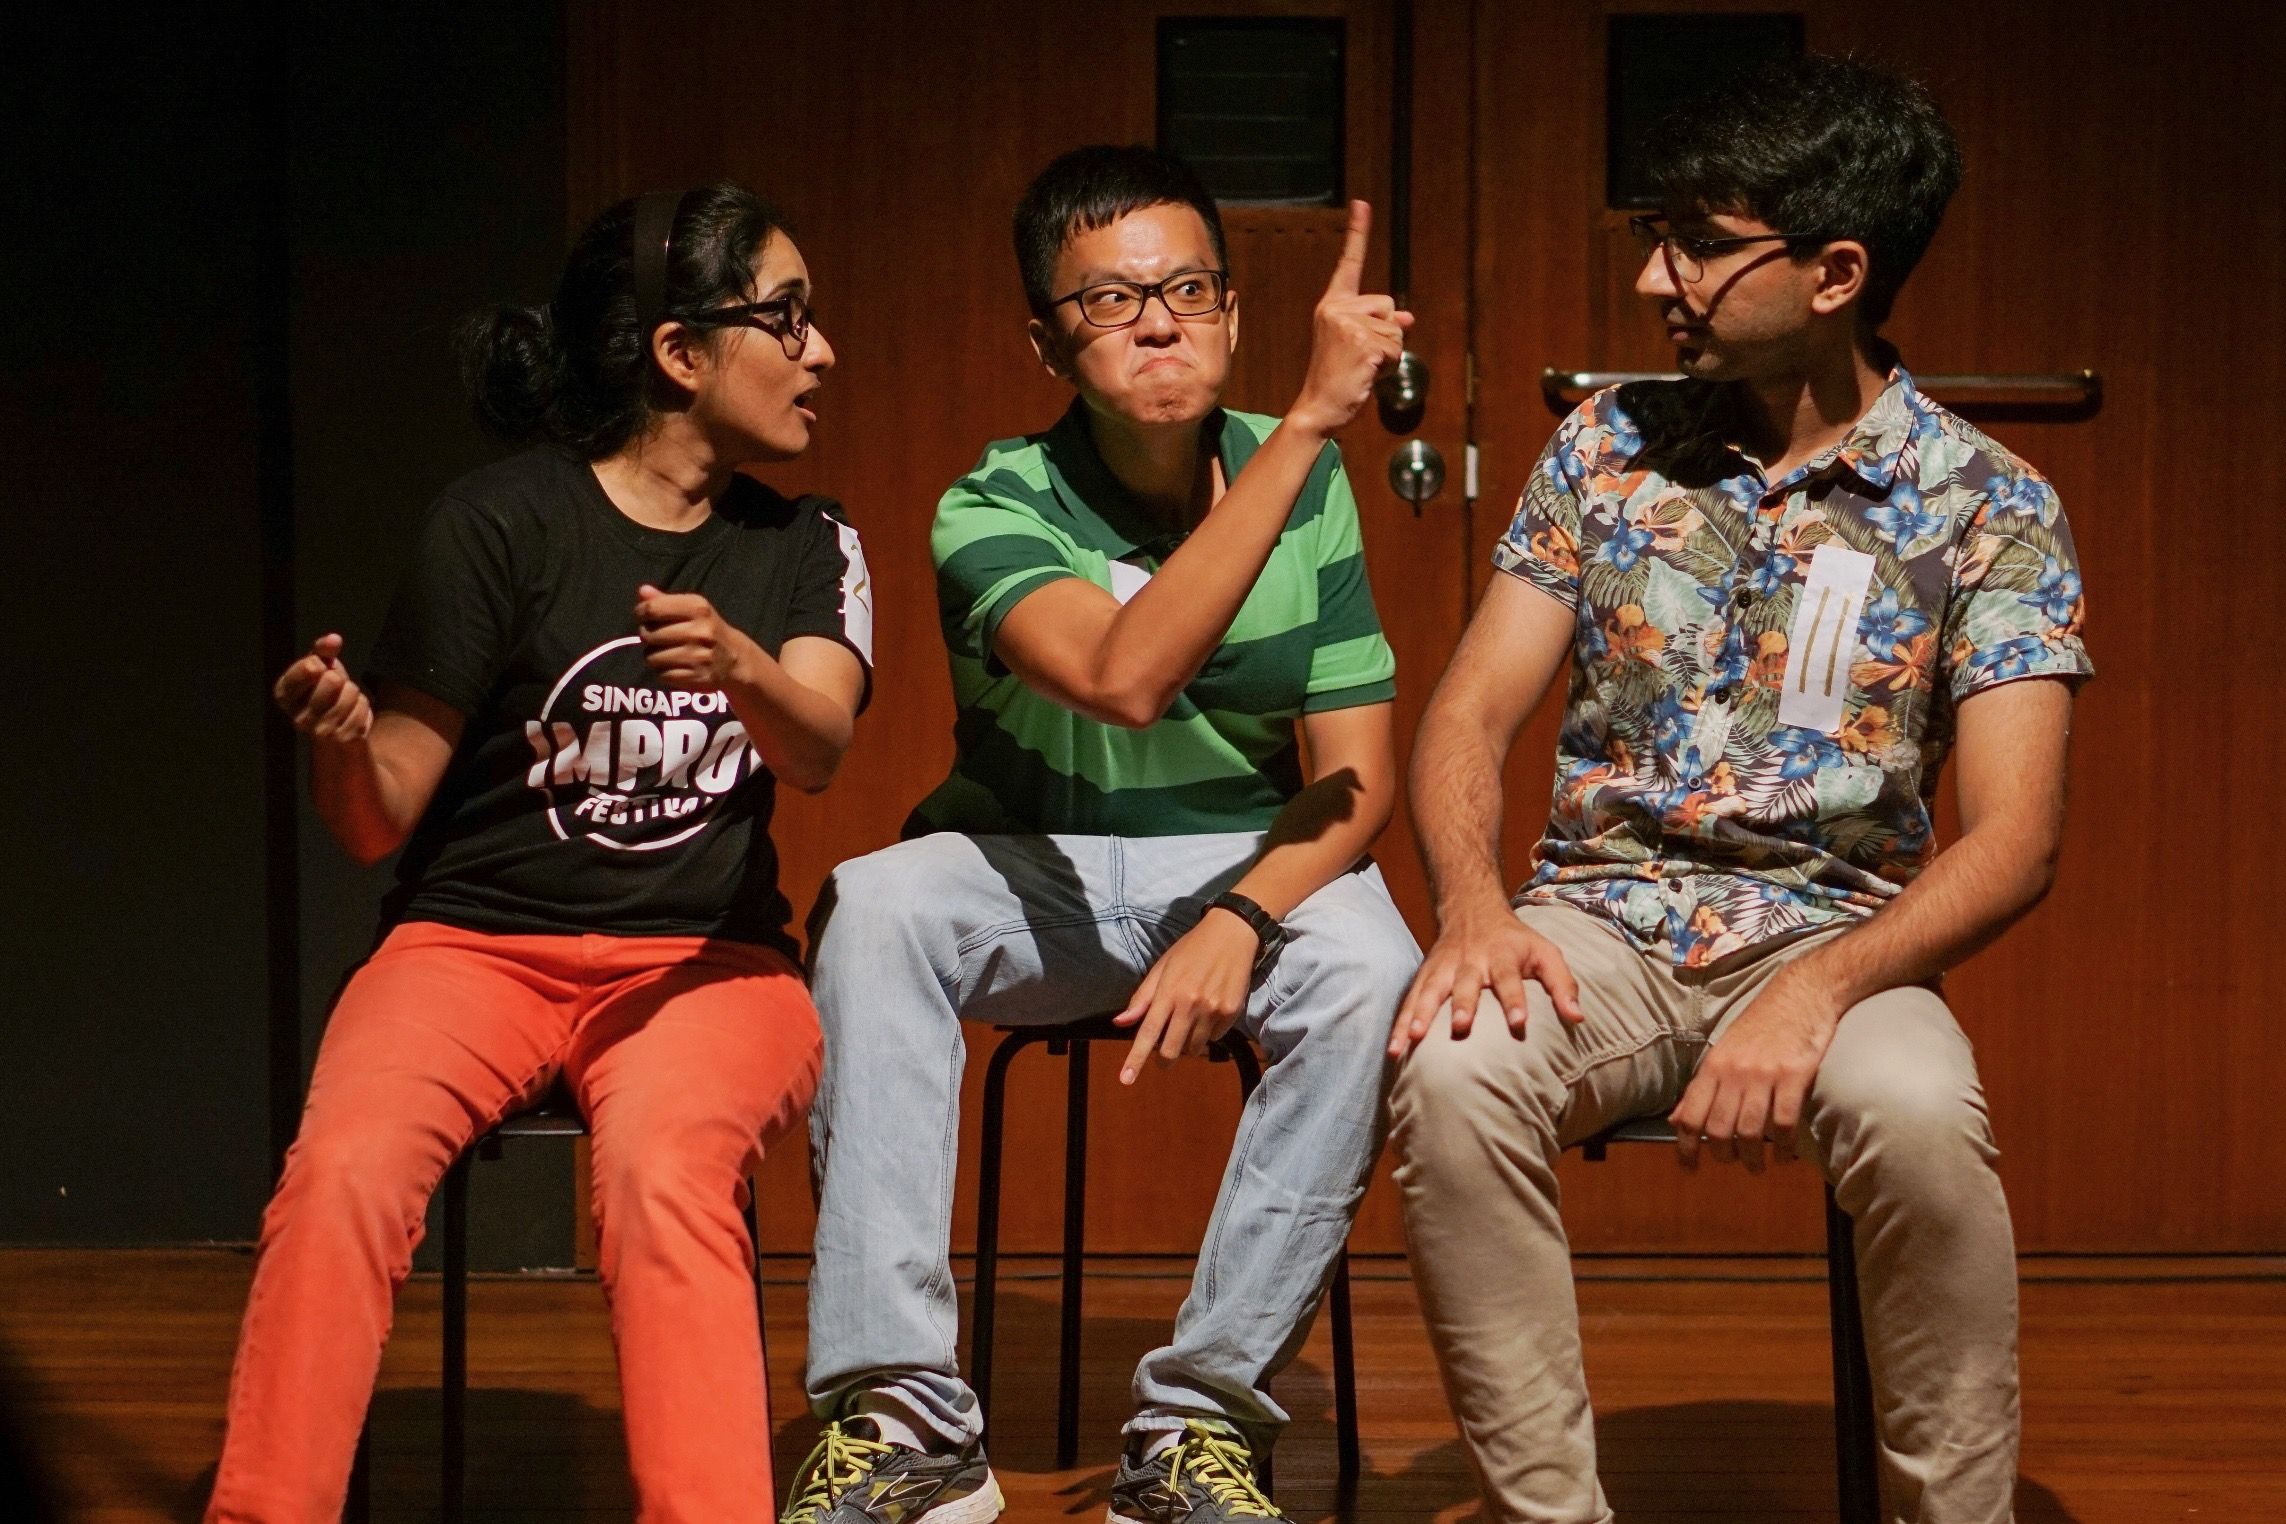 On Improv, Comedian’s Block and the Singapore Improv Festival